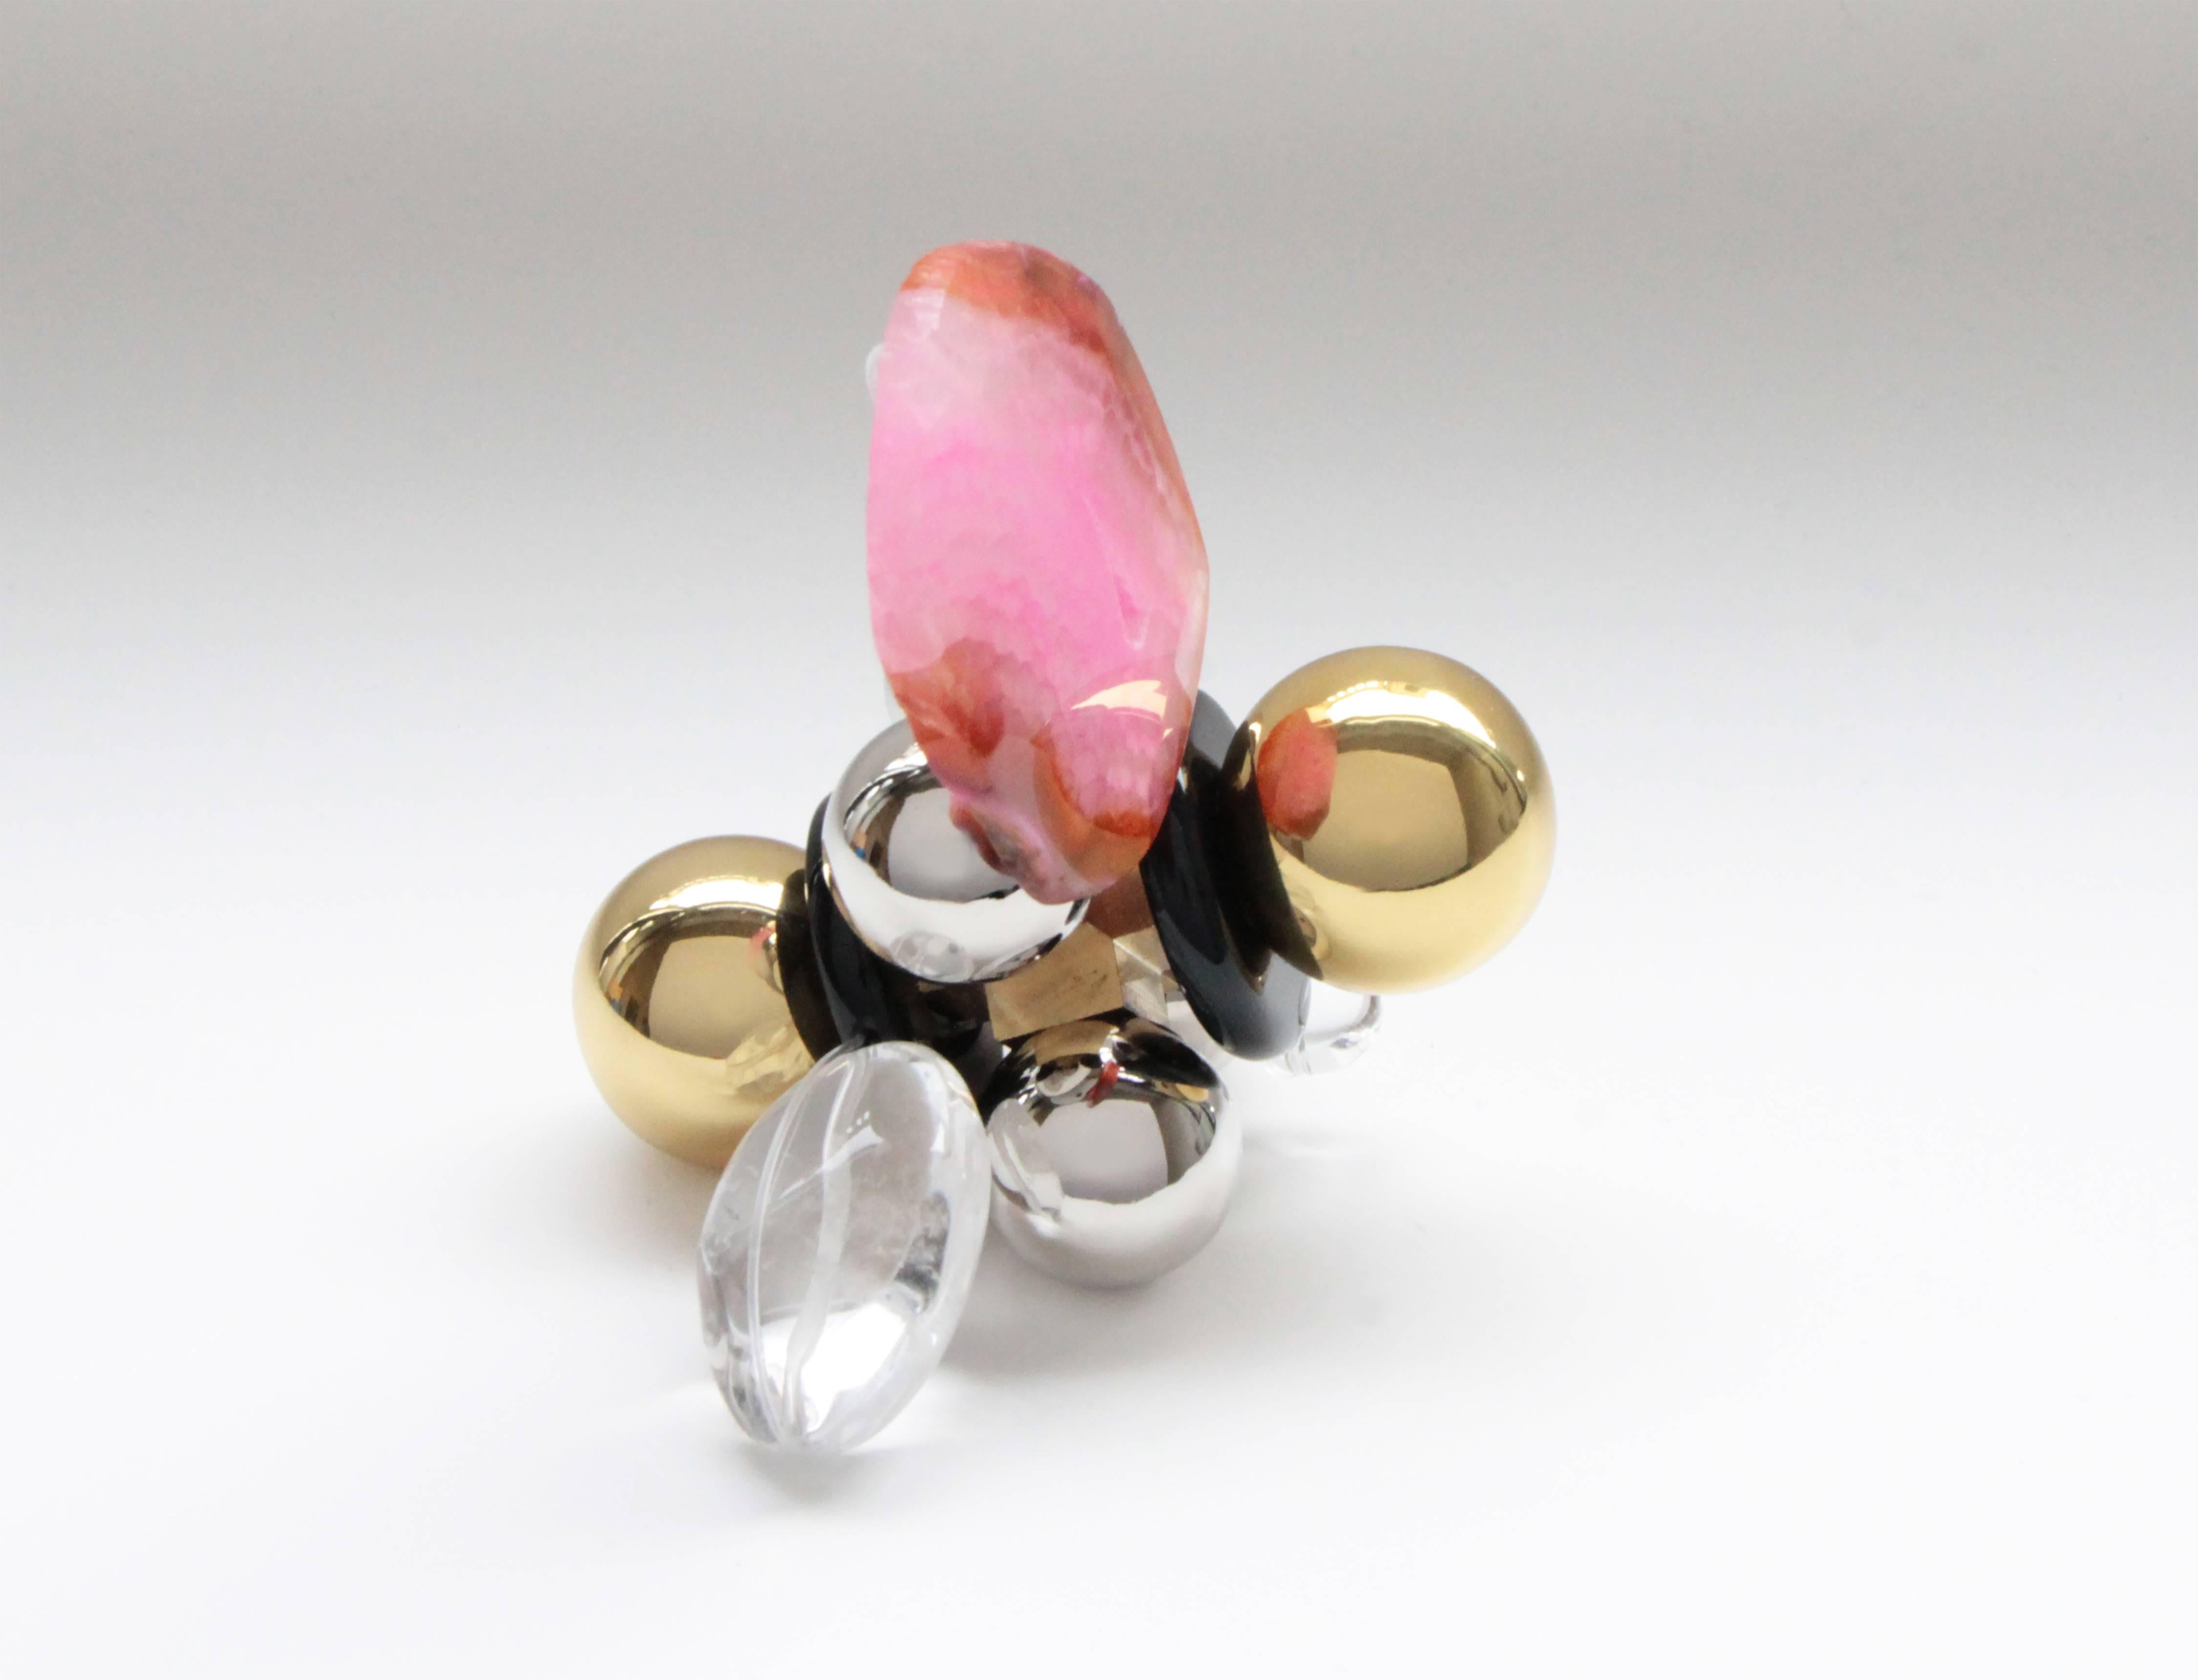 'Quarza' is hand crafted from polished and sealed cast brass, nickel-plated spheres, glass beads, pink and clear quartz with black stone. This contemporary object makes for an ideal paperweight or small sculpture curiosity. Each one is set with